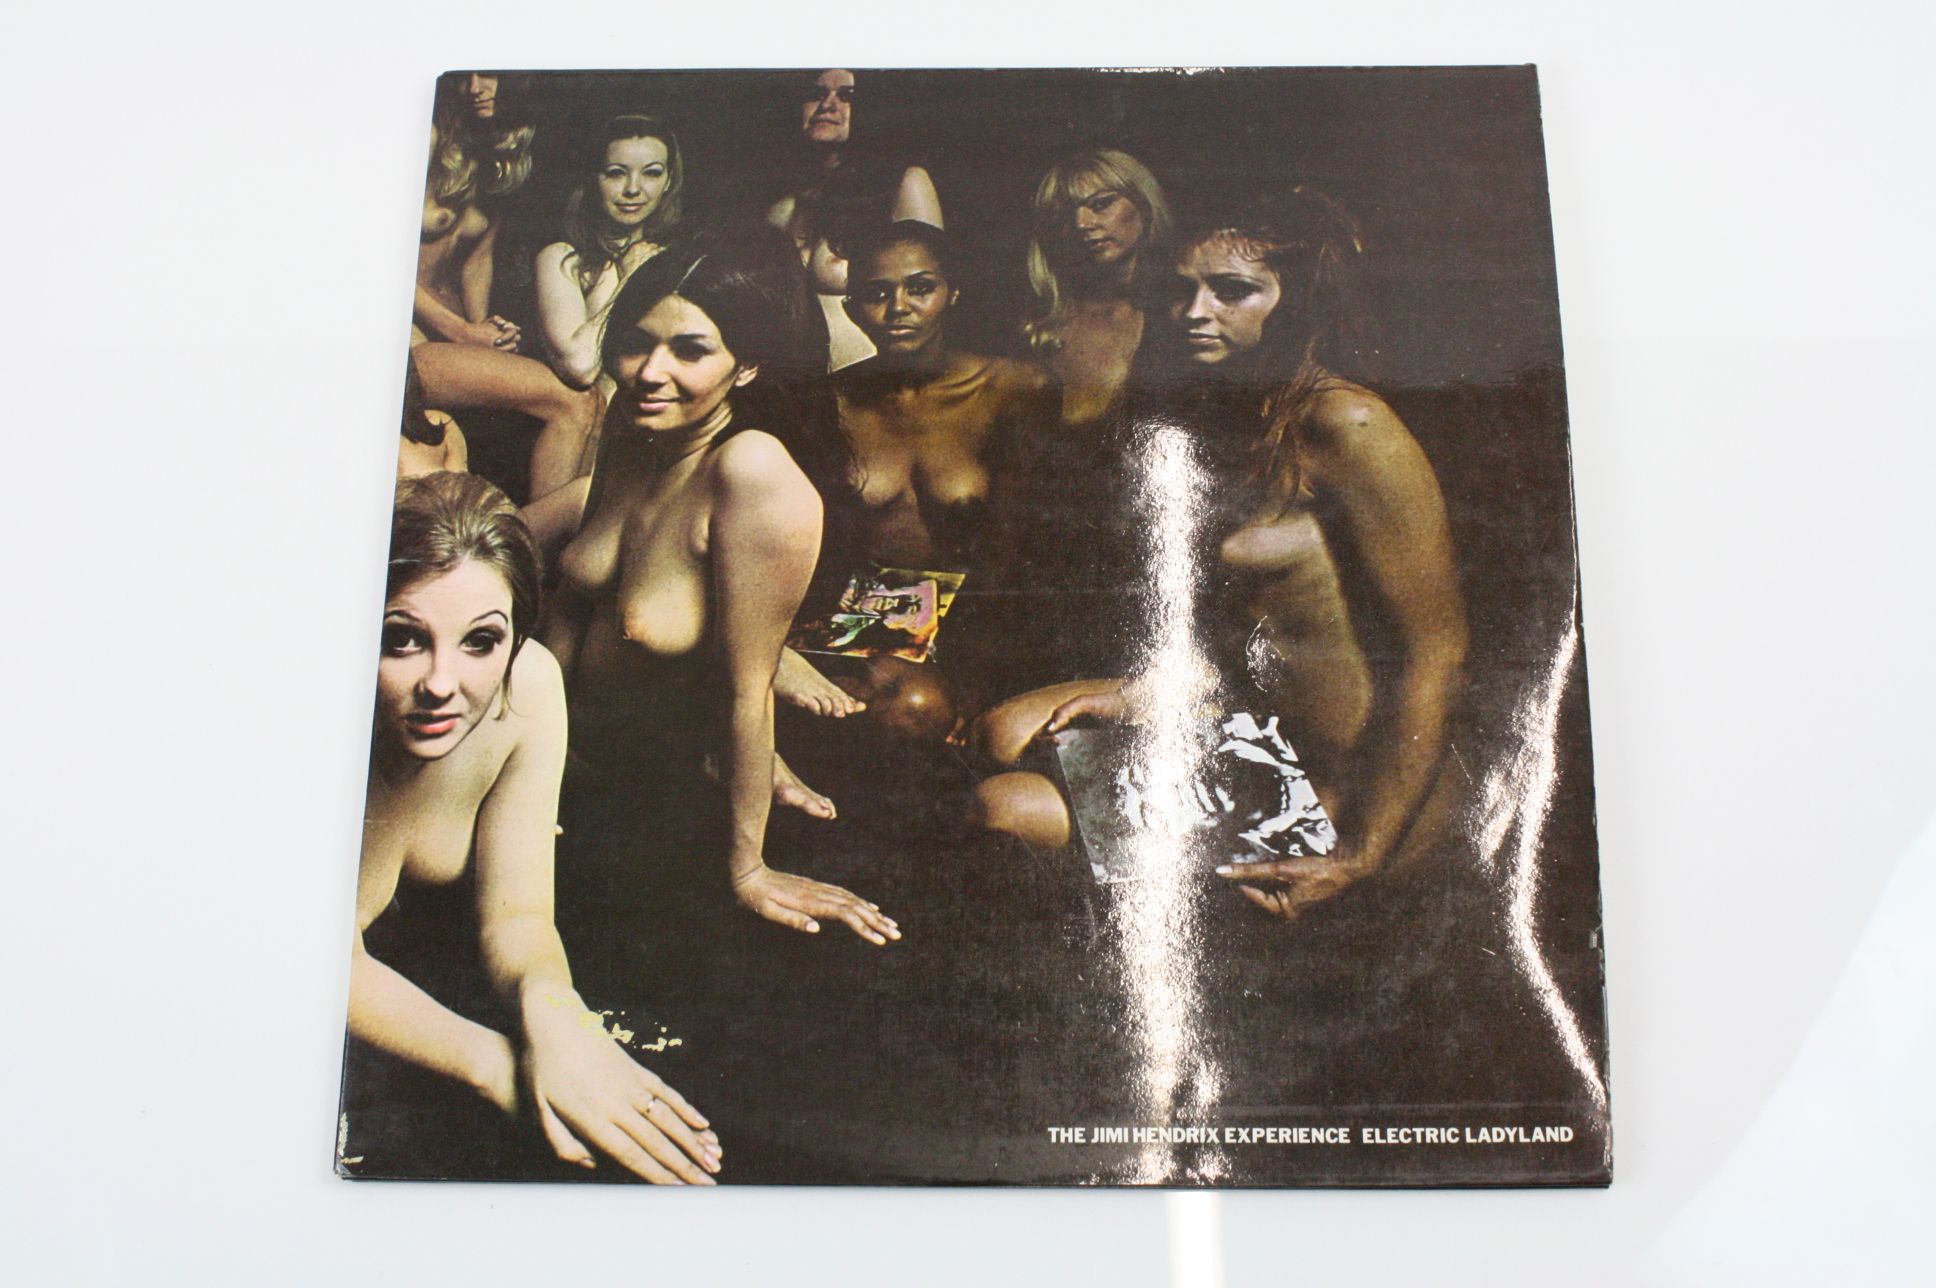 Vinyl - Jimi Hendrix Electric Ladyland on Polydor 2657012 reissue with white lettering inside, - Image 2 of 8